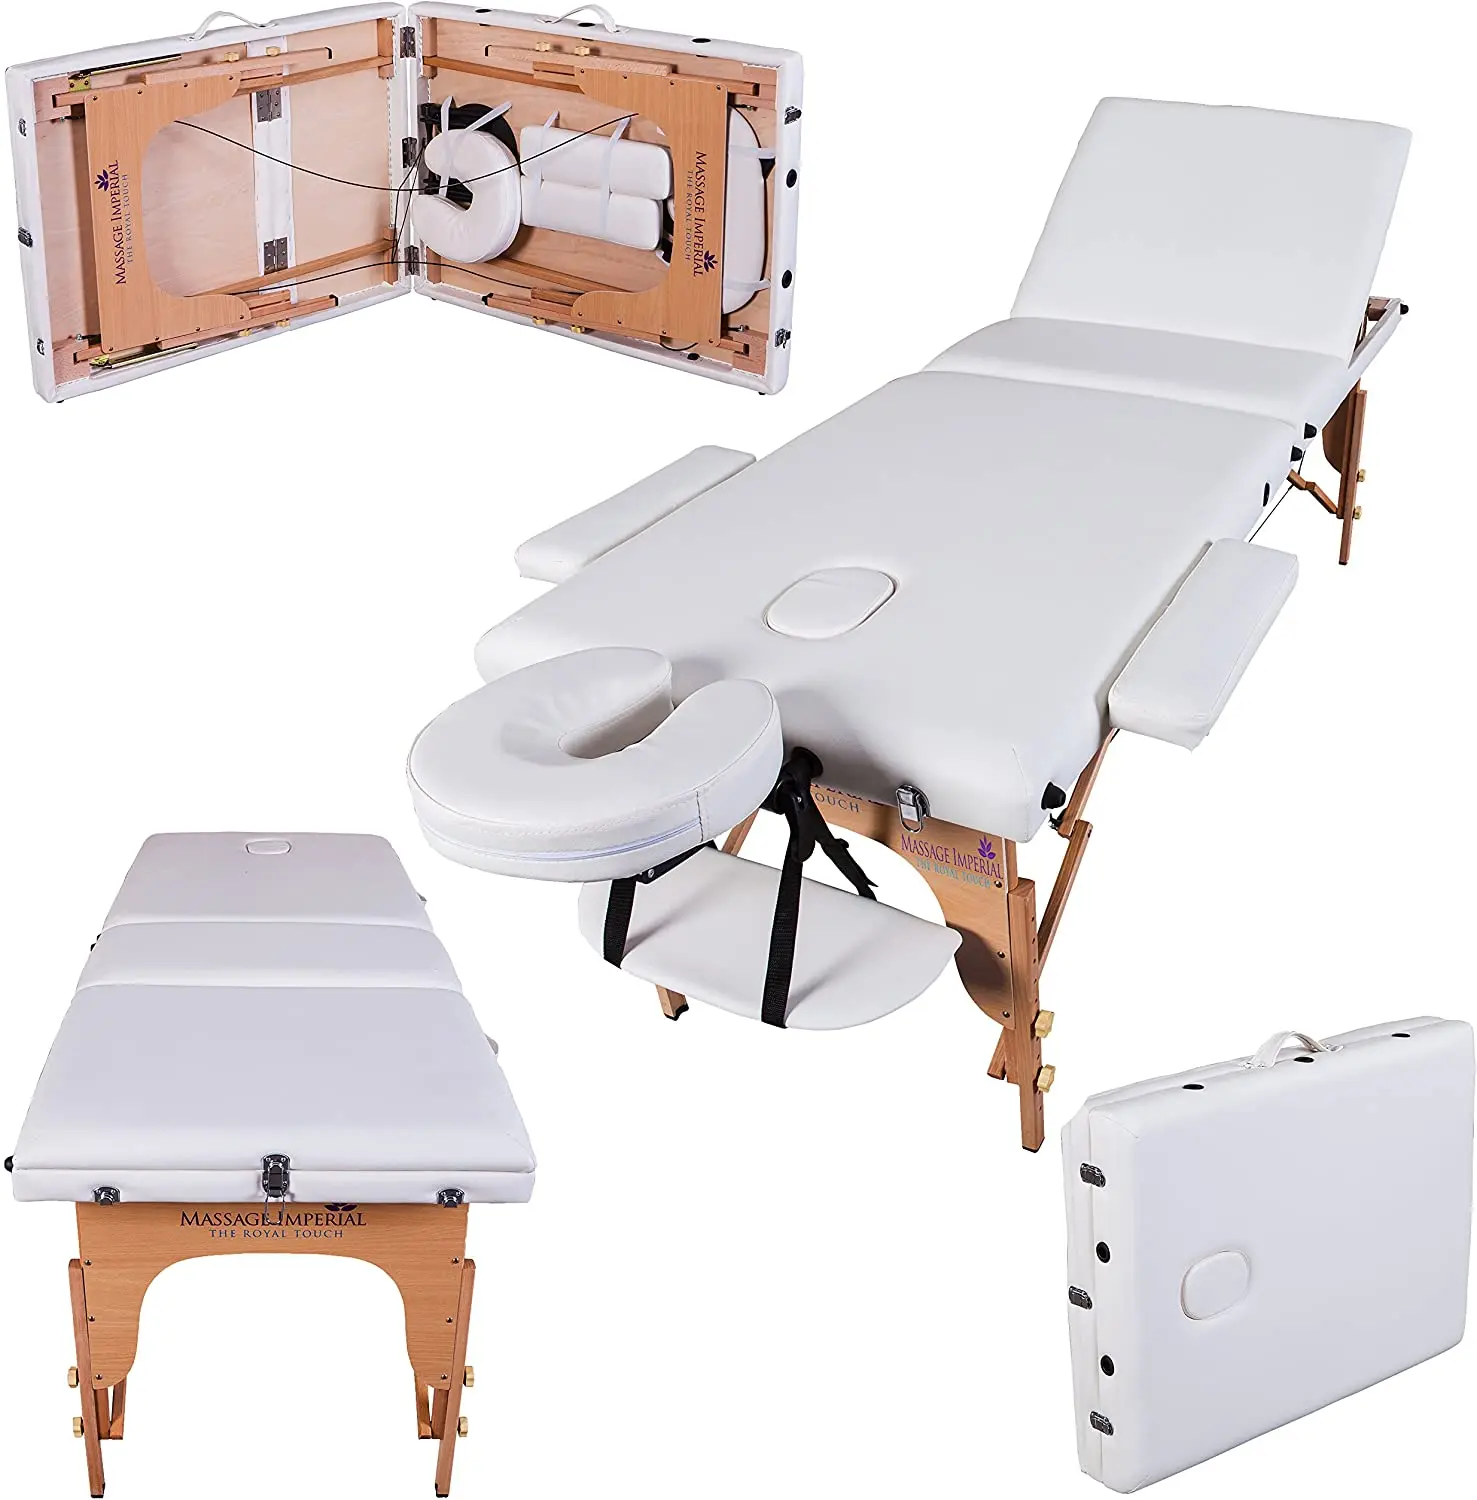 
White Color Portable Collapsible Tattoo Beauty Massage Bed Two Folding spa moxibustion bed massage table 